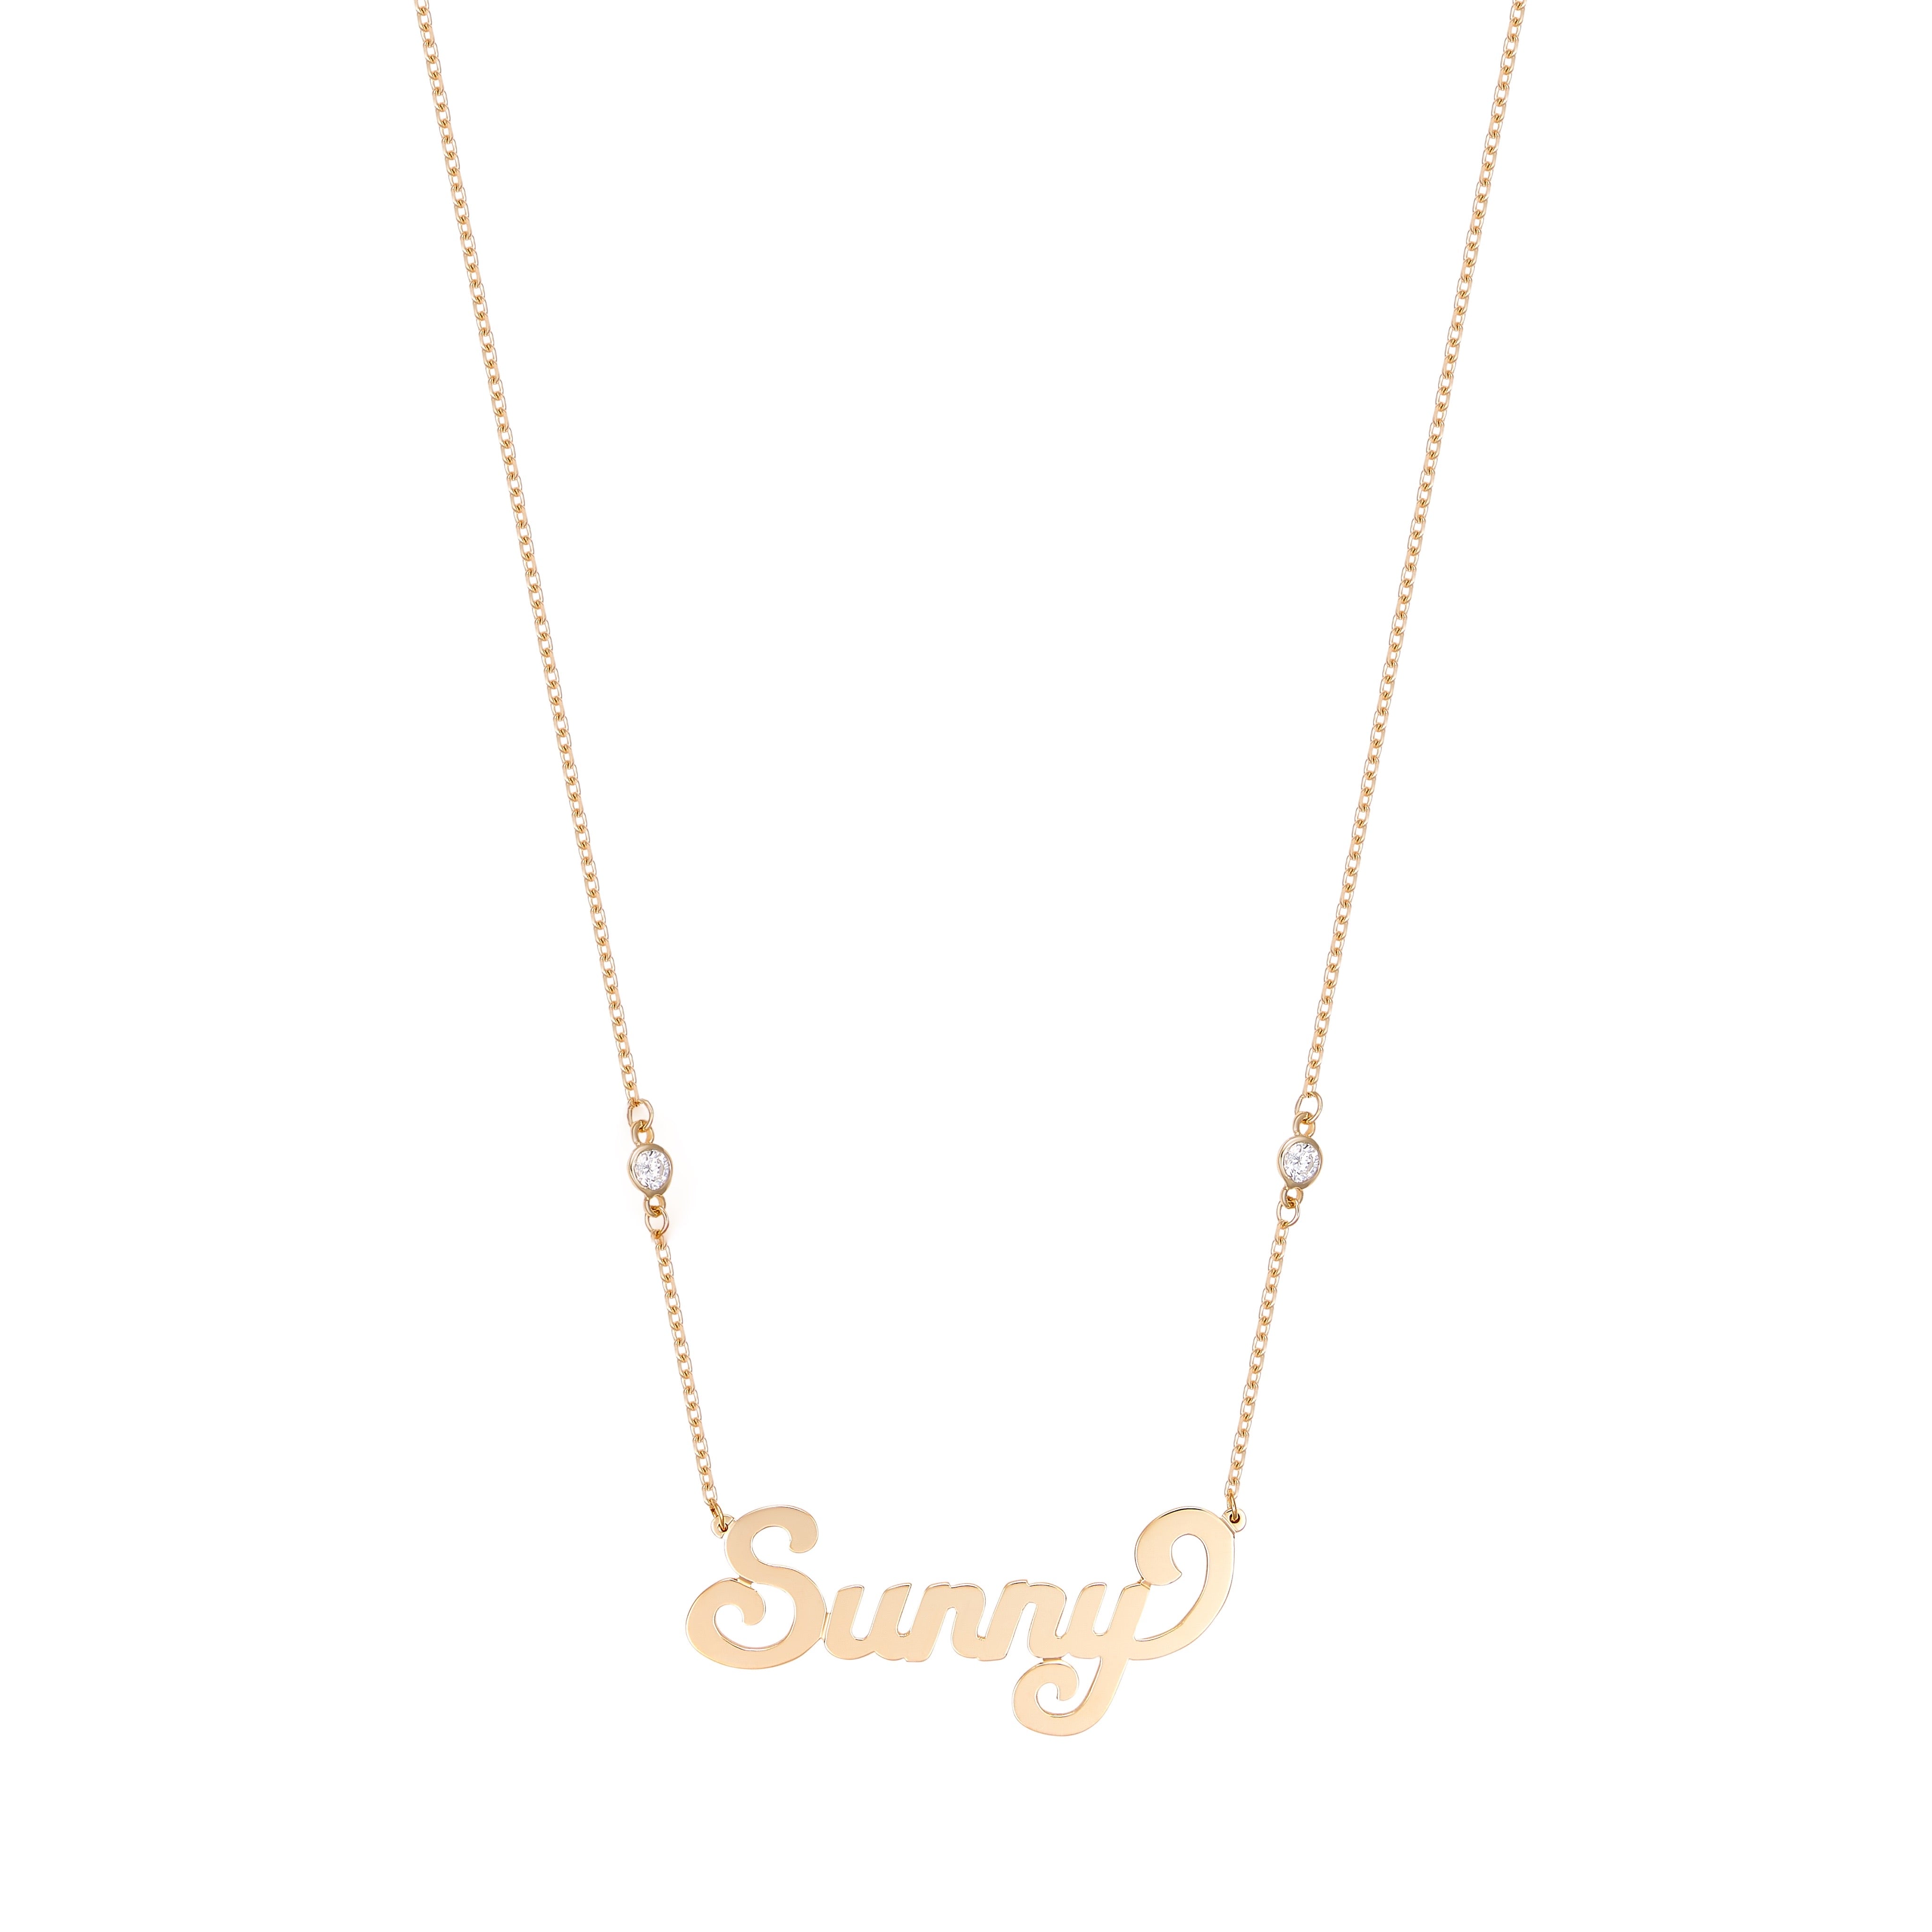 Large Script Name Necklace With Diamond(s) In The Chain